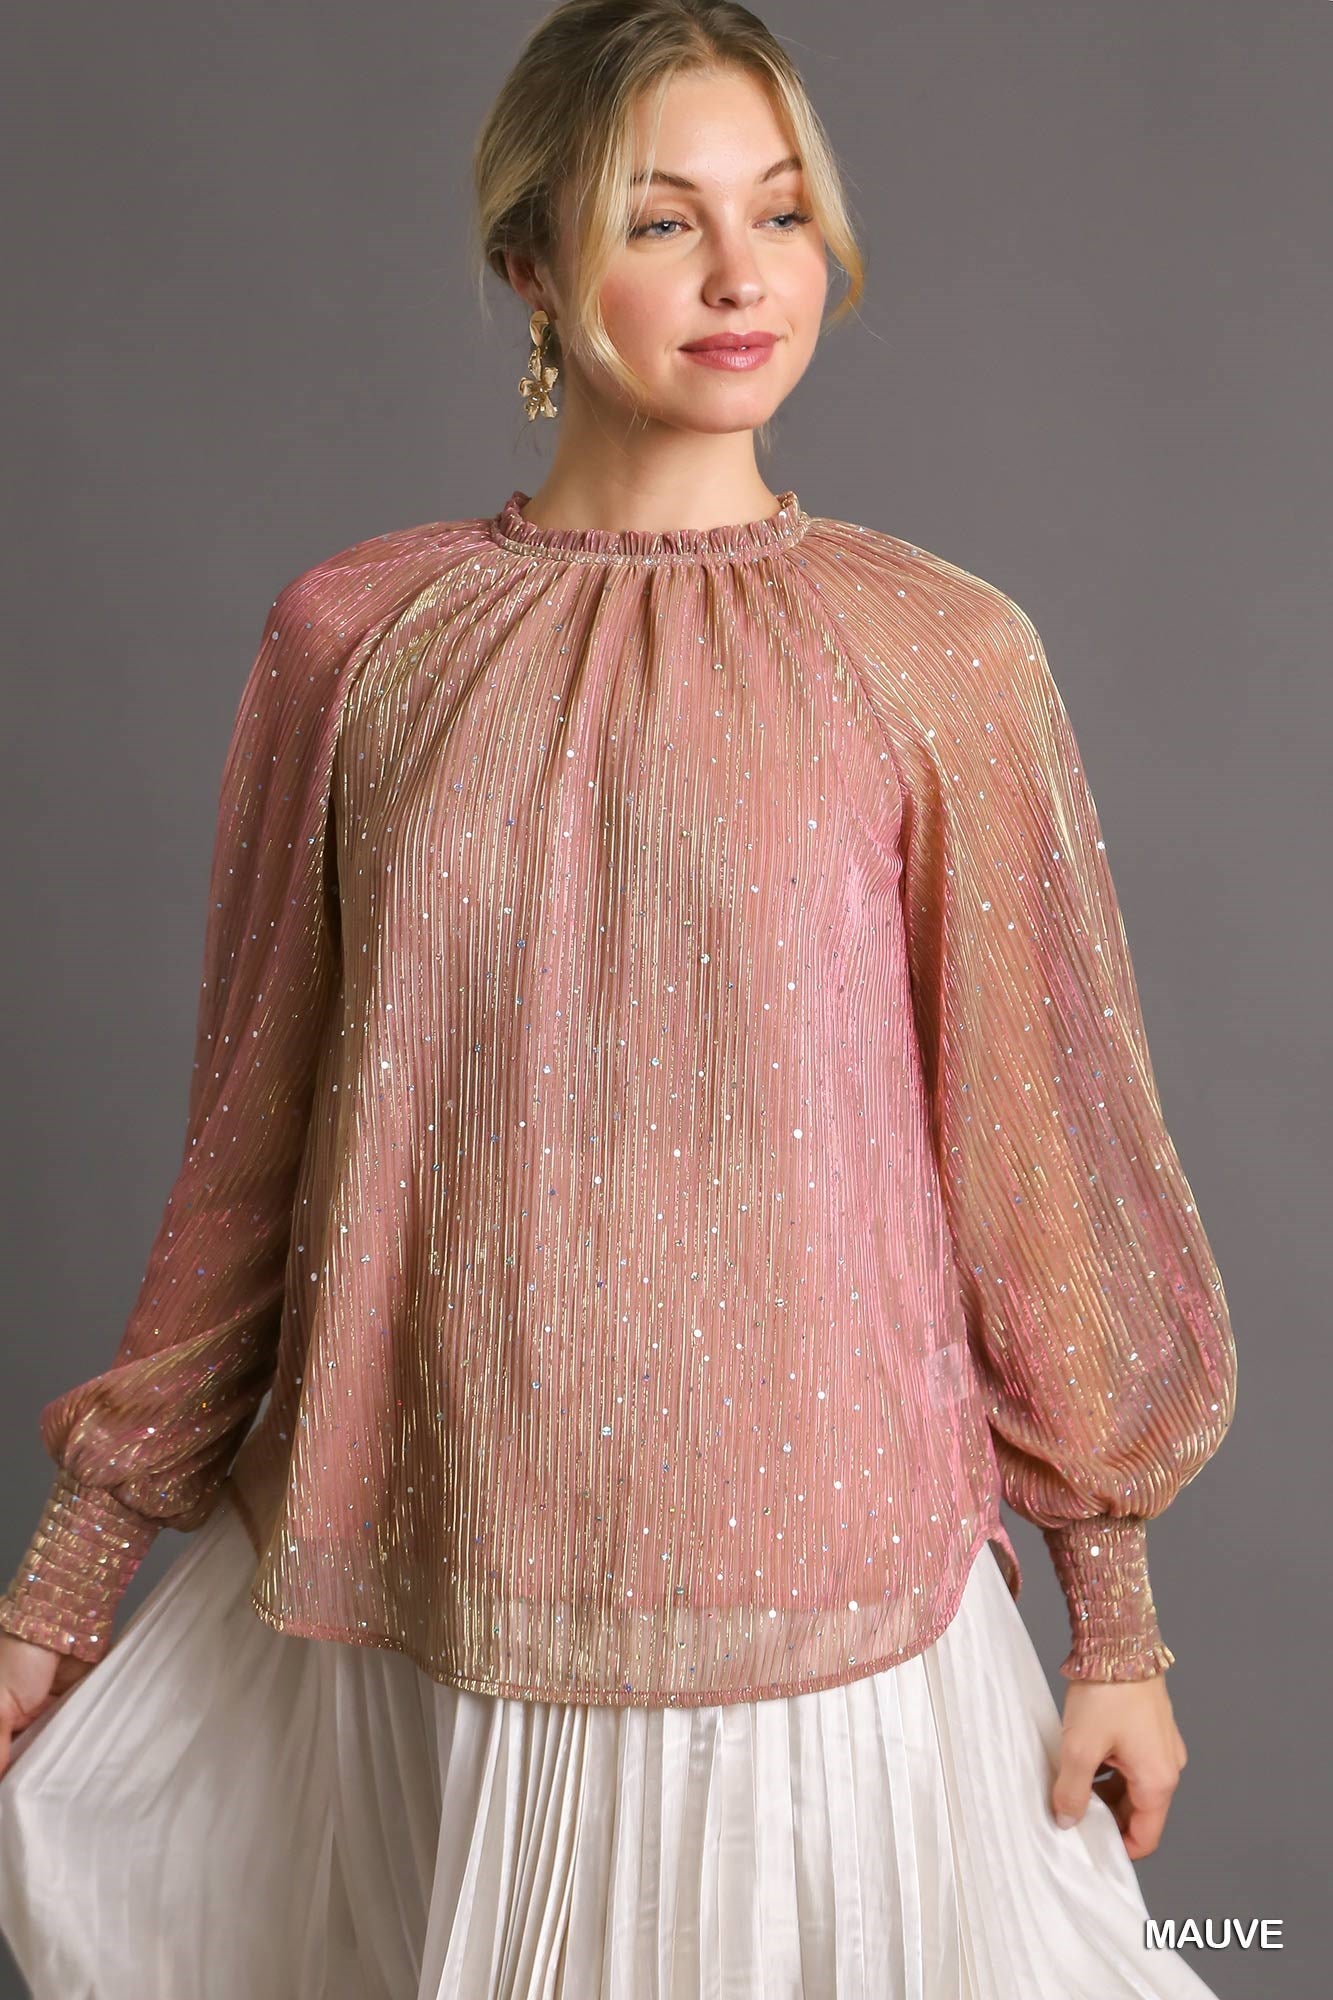 Mauve Pleated Shimmer Top w/ Ruffle Neckline